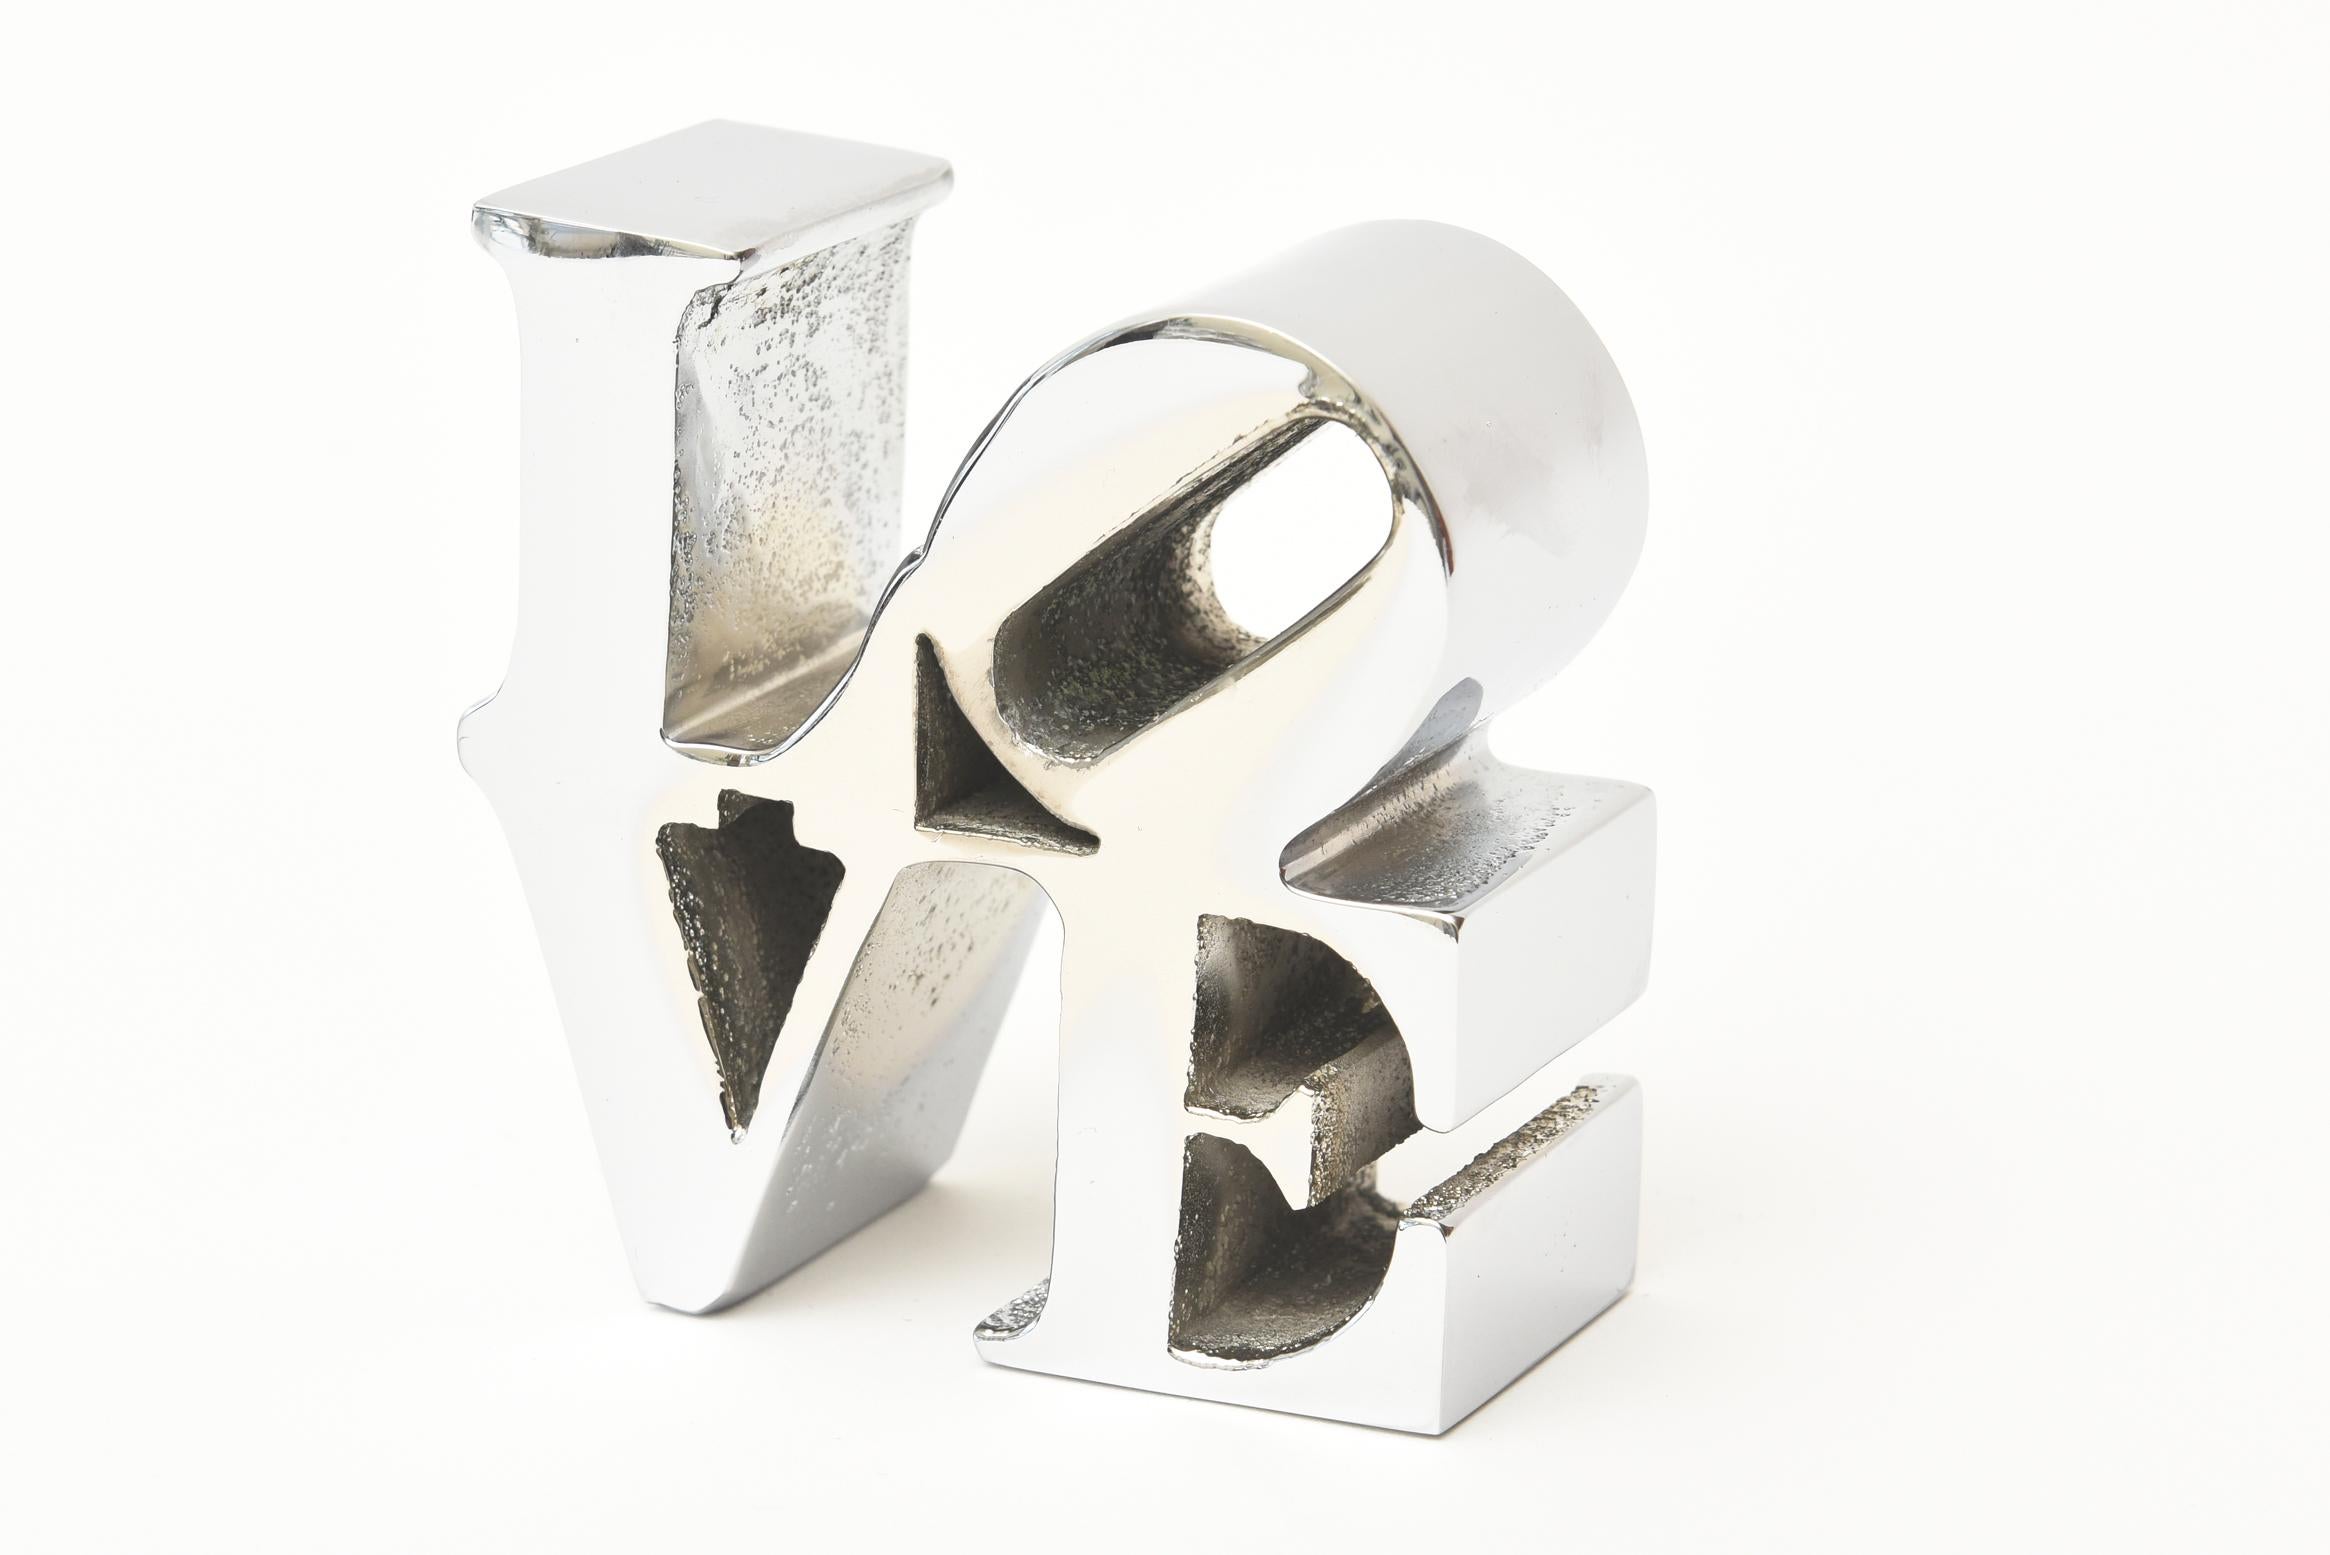 This iconic small Robert Indiana paperweight love sculpture is nickel-plated over the chrome. It is from the 1970s and was originally sold at MoMA in NYC and other various museum shops at the time. Robert Indiana as an artist and painter put himself